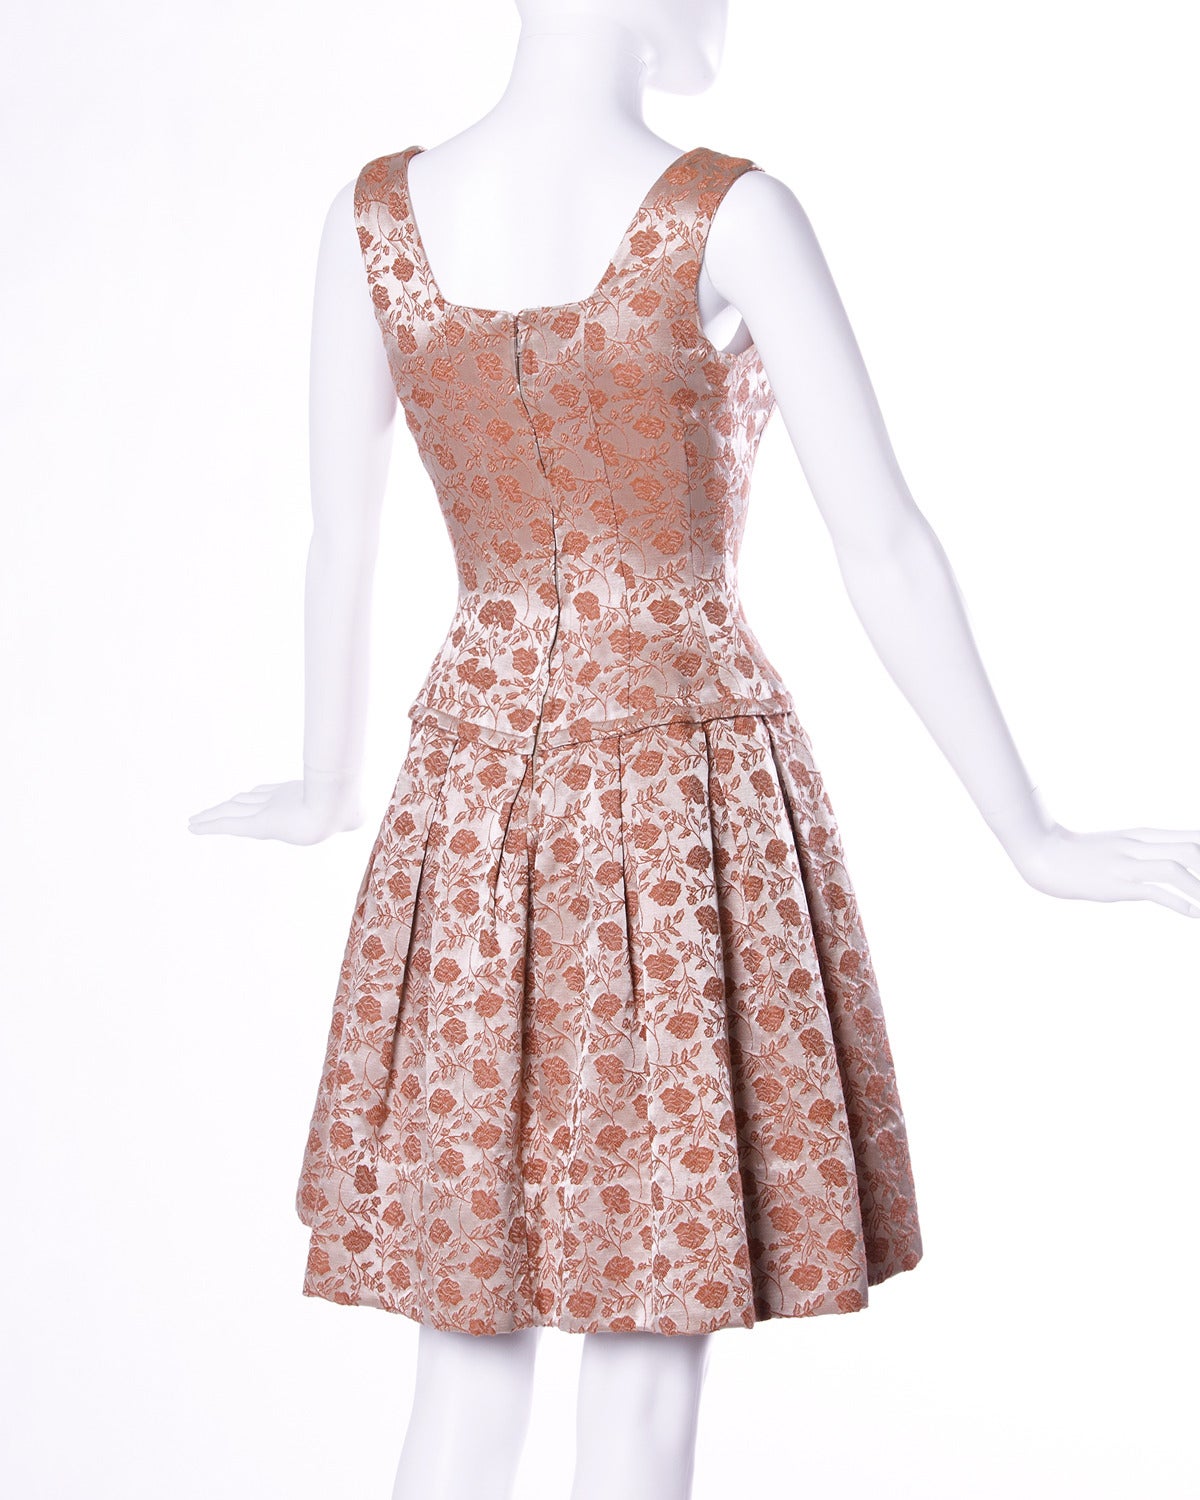 Vintage floral brocade cocktail dress with a drop waist.

Details:

Unlined
Back Metal Zip and Hook Closure
Marked Size: Not Marked
Color: Dark Rosy Peach
Fabric: Brocade

Measurements:

Bust: 32